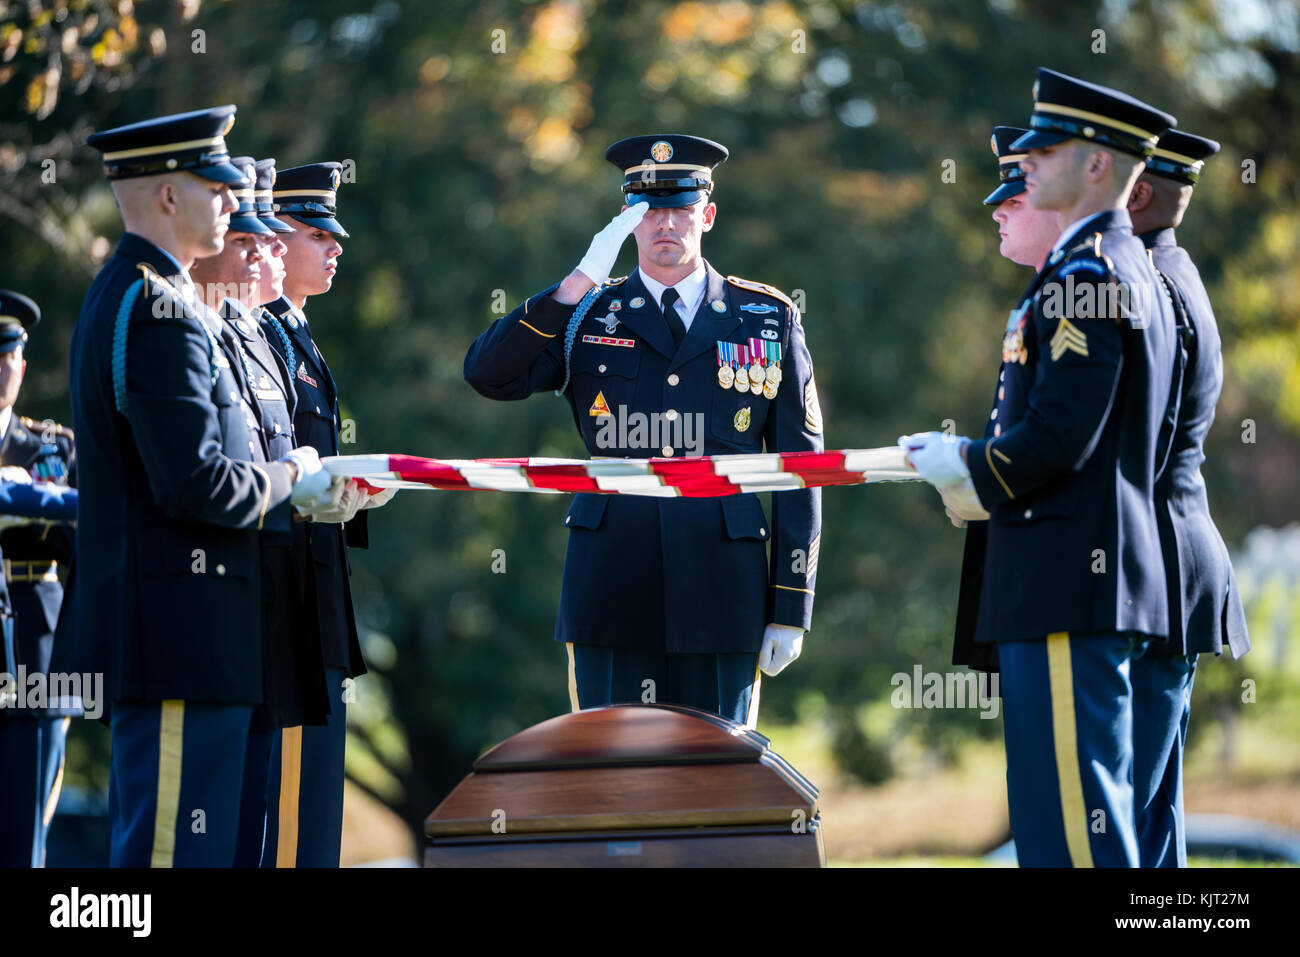 U.S. Army Honor Guard soldiers conduct a military funeral for U.S. Army soldier Bryan Black at the Arlington National Cemetery October 30, 2017 in Arlington, Virginia. Black died from wounds sustained during enemy contact in Niger. (photo by Elizabeth Fraser via Planetpix) Stock Photo